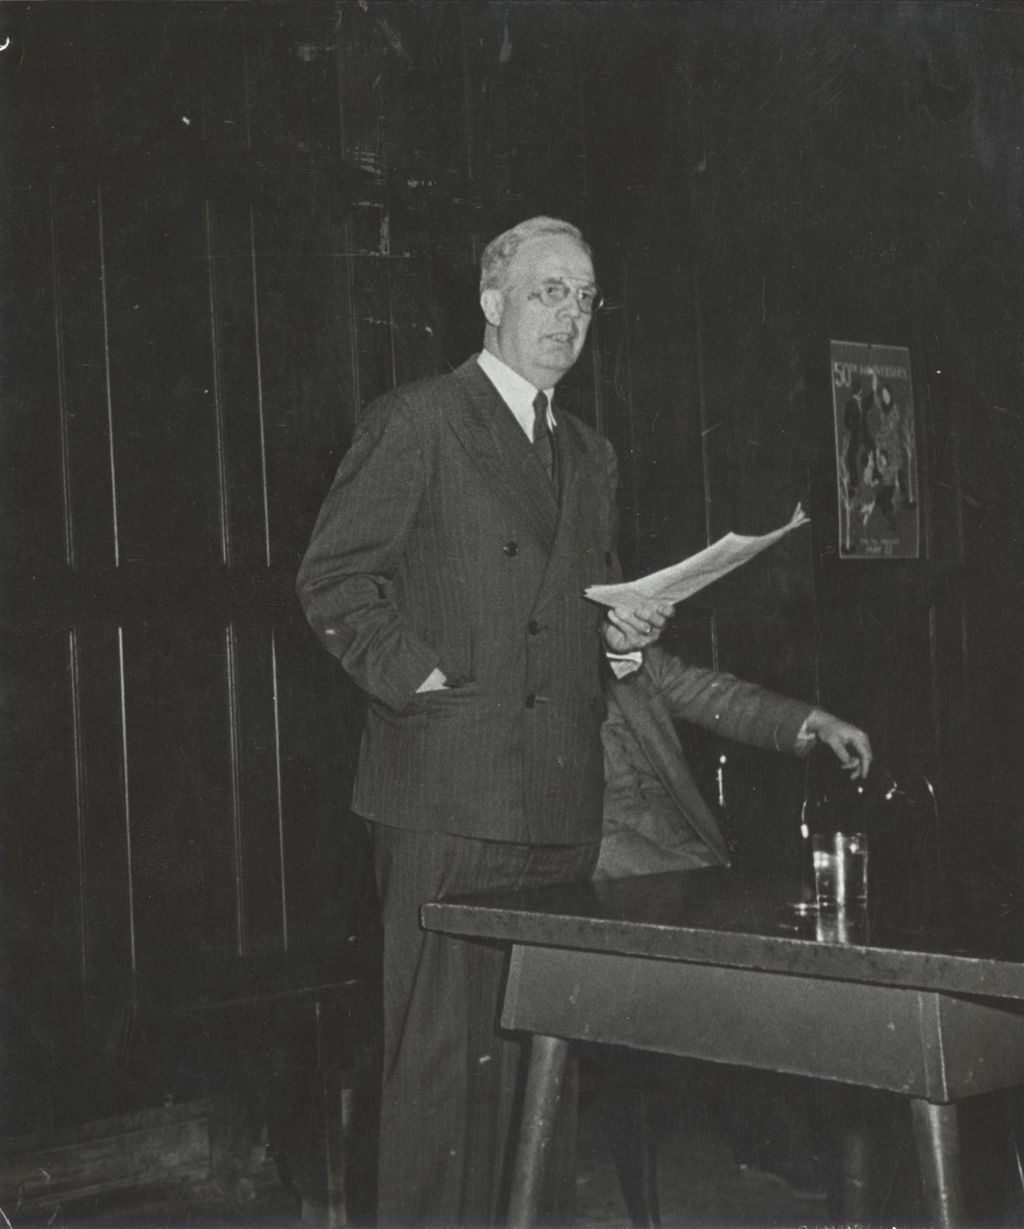 Miniature of Clarence E. Pickett, executive secretary of the American Friends Service Committee, speaking at an event celebrating the 50th Anniversary of Hull-House